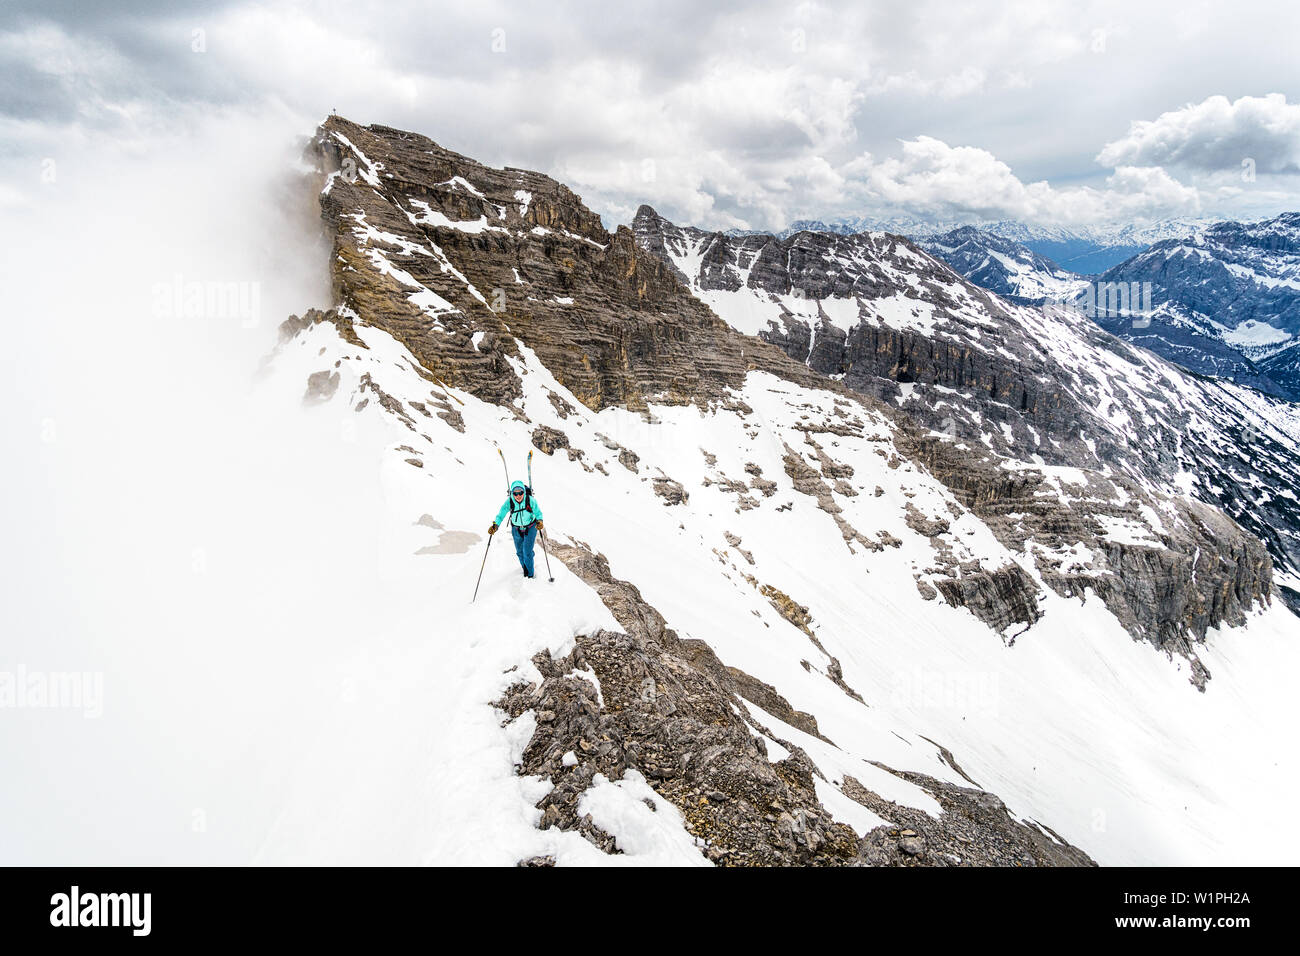 Young woman ascending a mountain ridge with skis on the backpack during wintertime, clouds moving in, Birkkarspitze, Karwendel, Tyrol, Austria Stock Photo